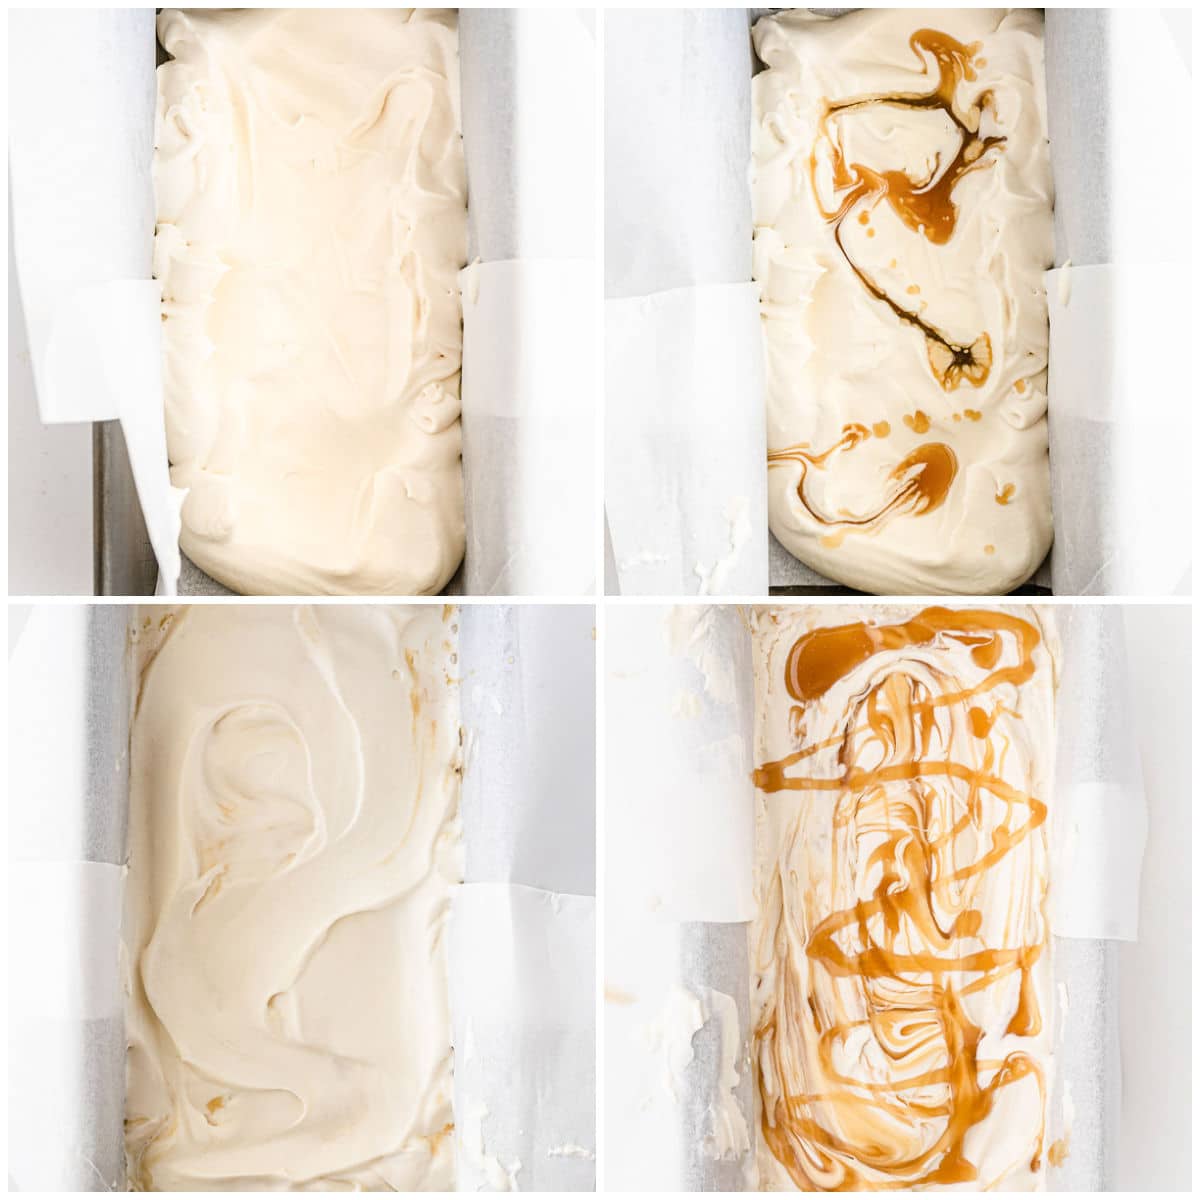 rectangle loaf pan with vanilla ice cream with butterscotch swirls drizzled all over.